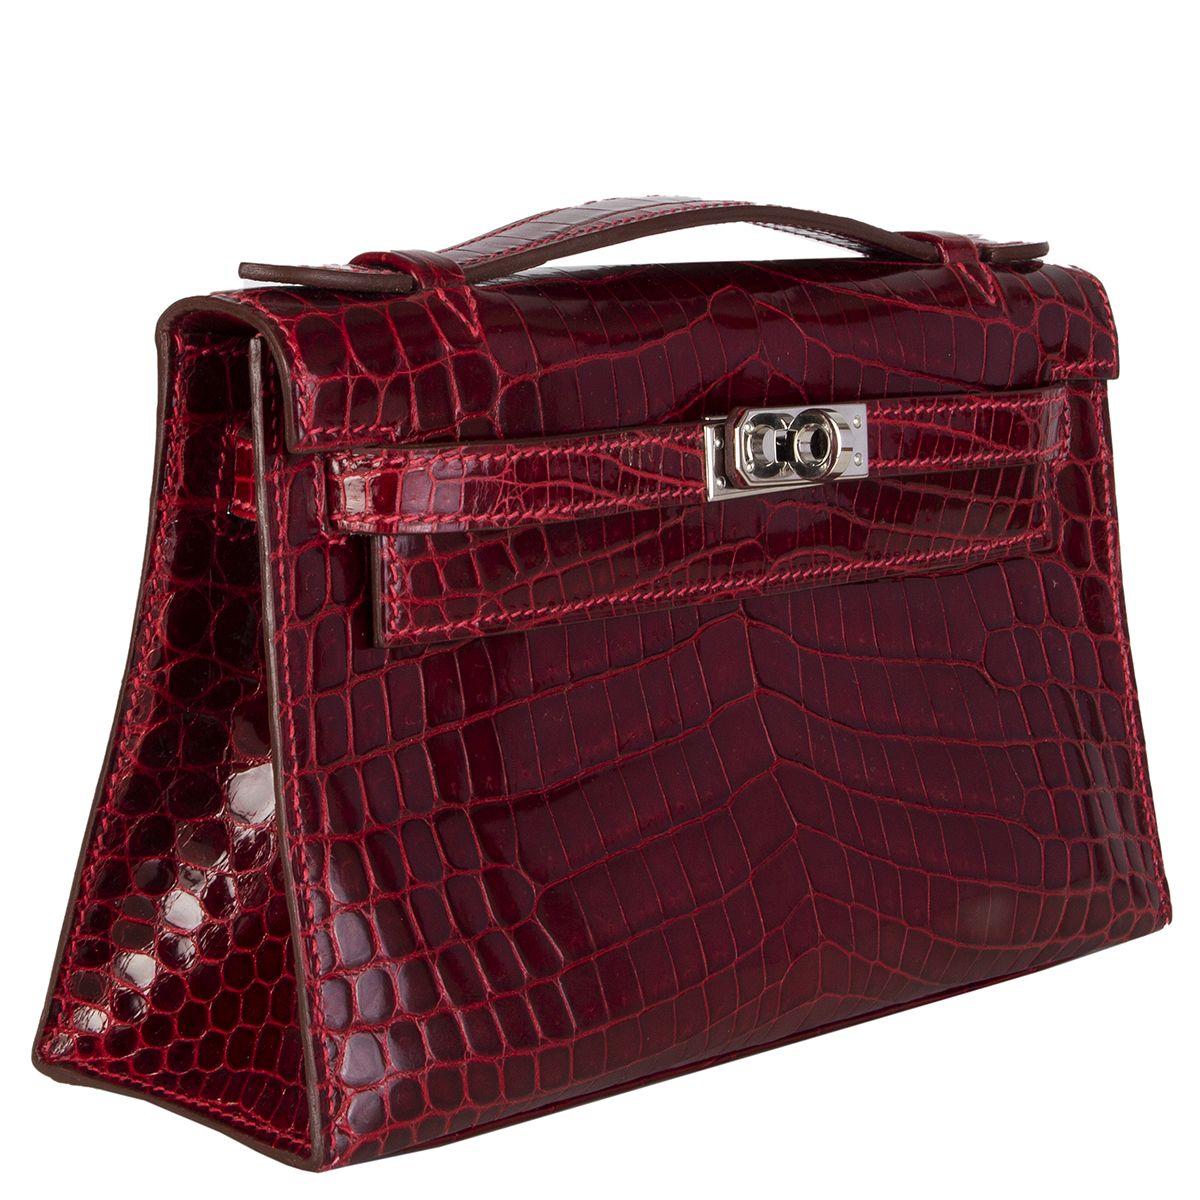 Hermès 'Kelly Pochette' in Roughe H (burgundy) shiny niloticus crocodile. Lined in Chèvre (goat skin) with an open pocket against the back. Has been carried and is in excellent condition. Comes with dust bag. 

Height 14cm (5.5in)
Width 22cm